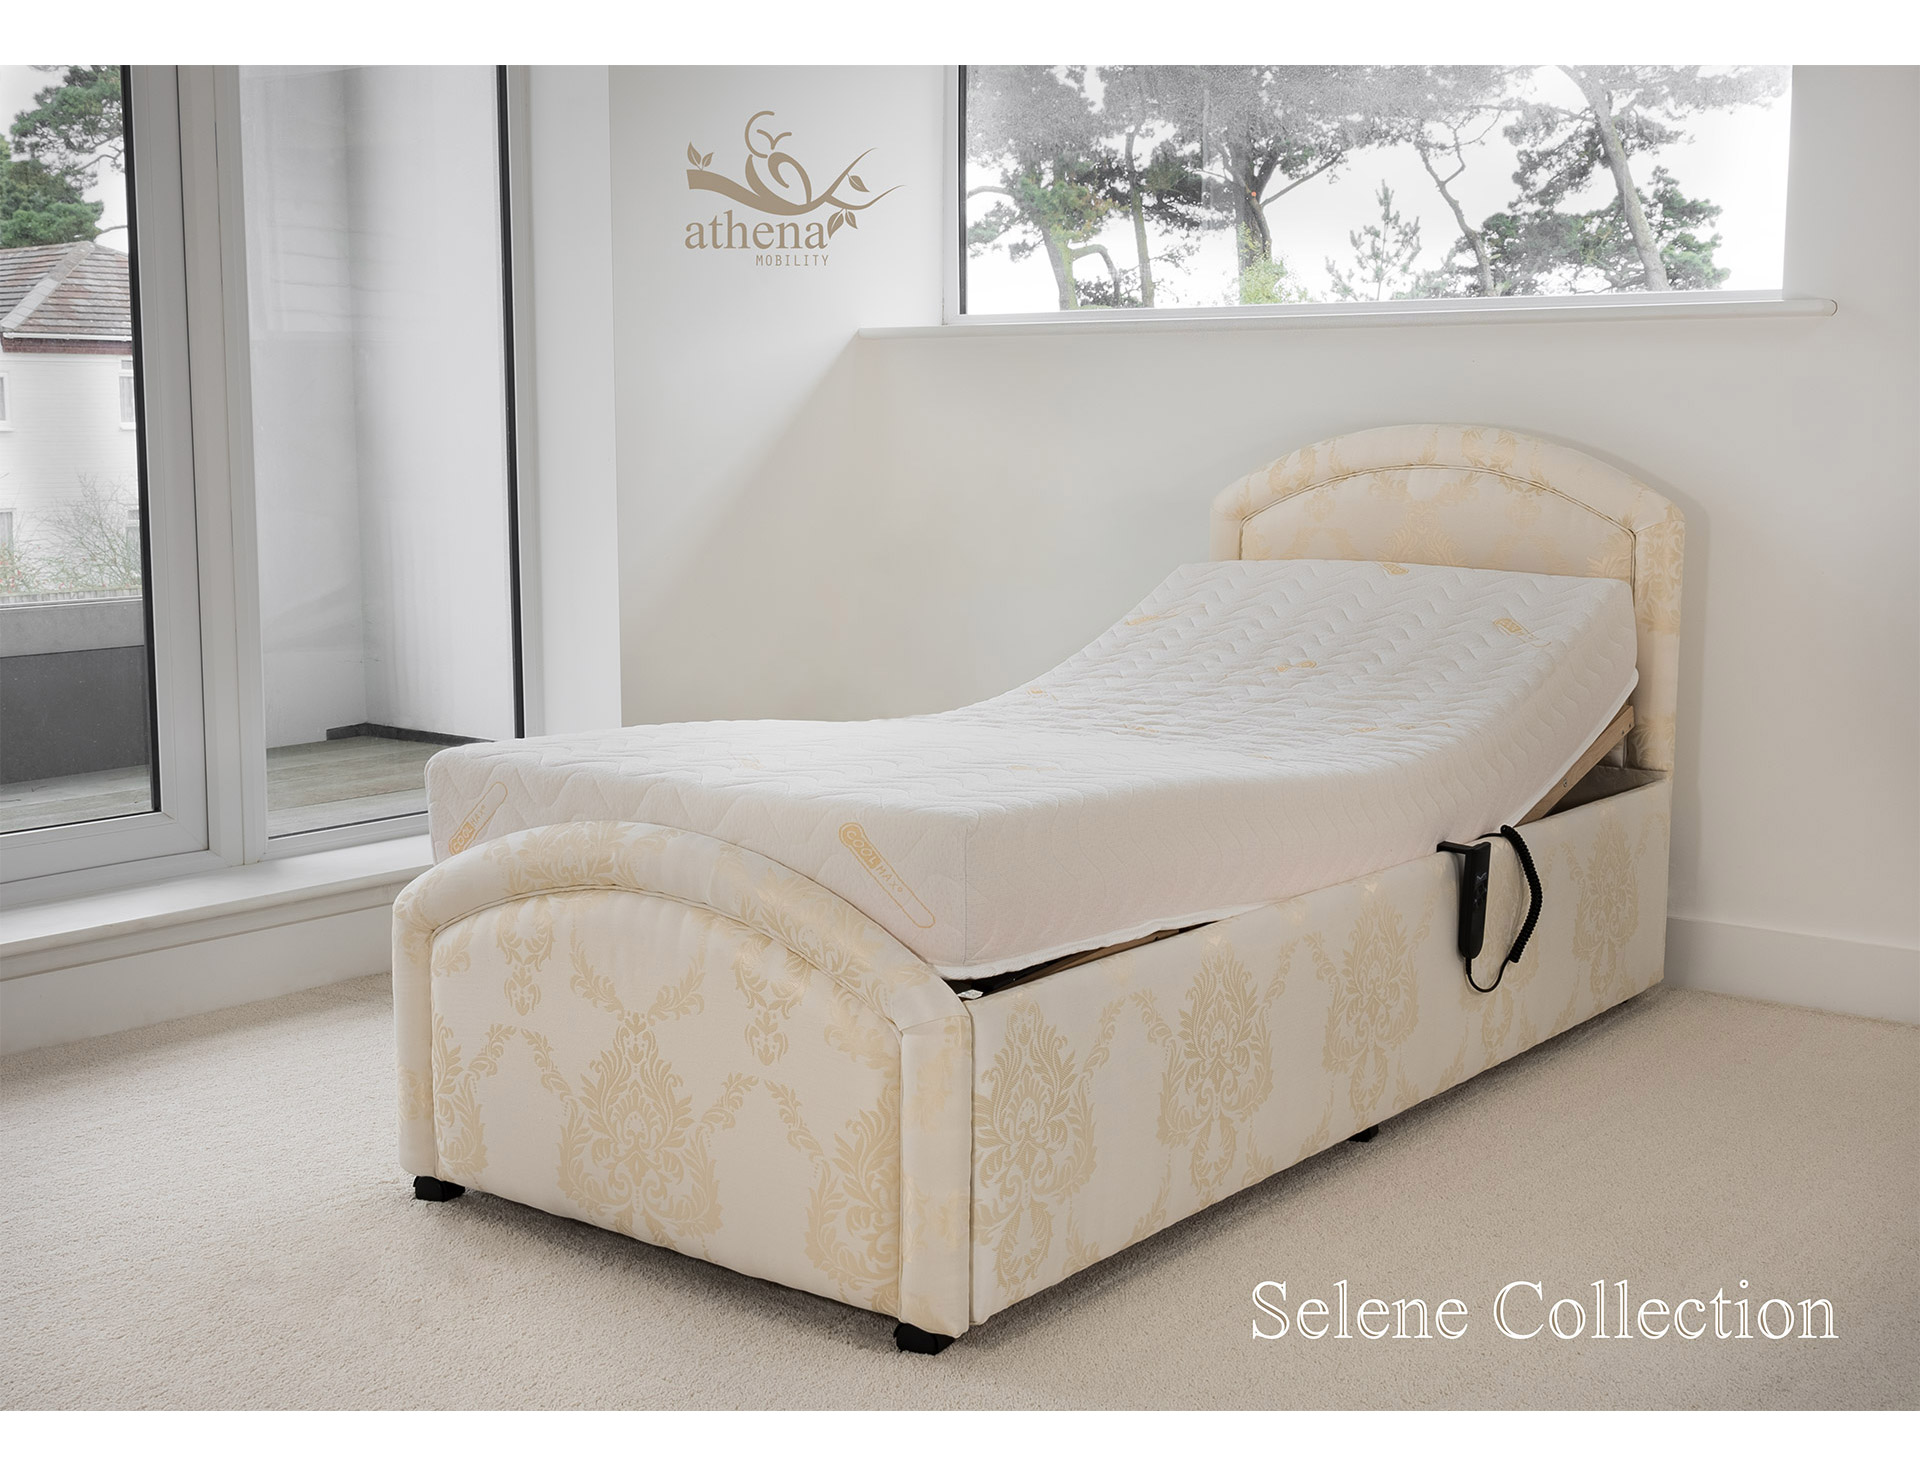 Athena Mobility | Selene Bed Collection